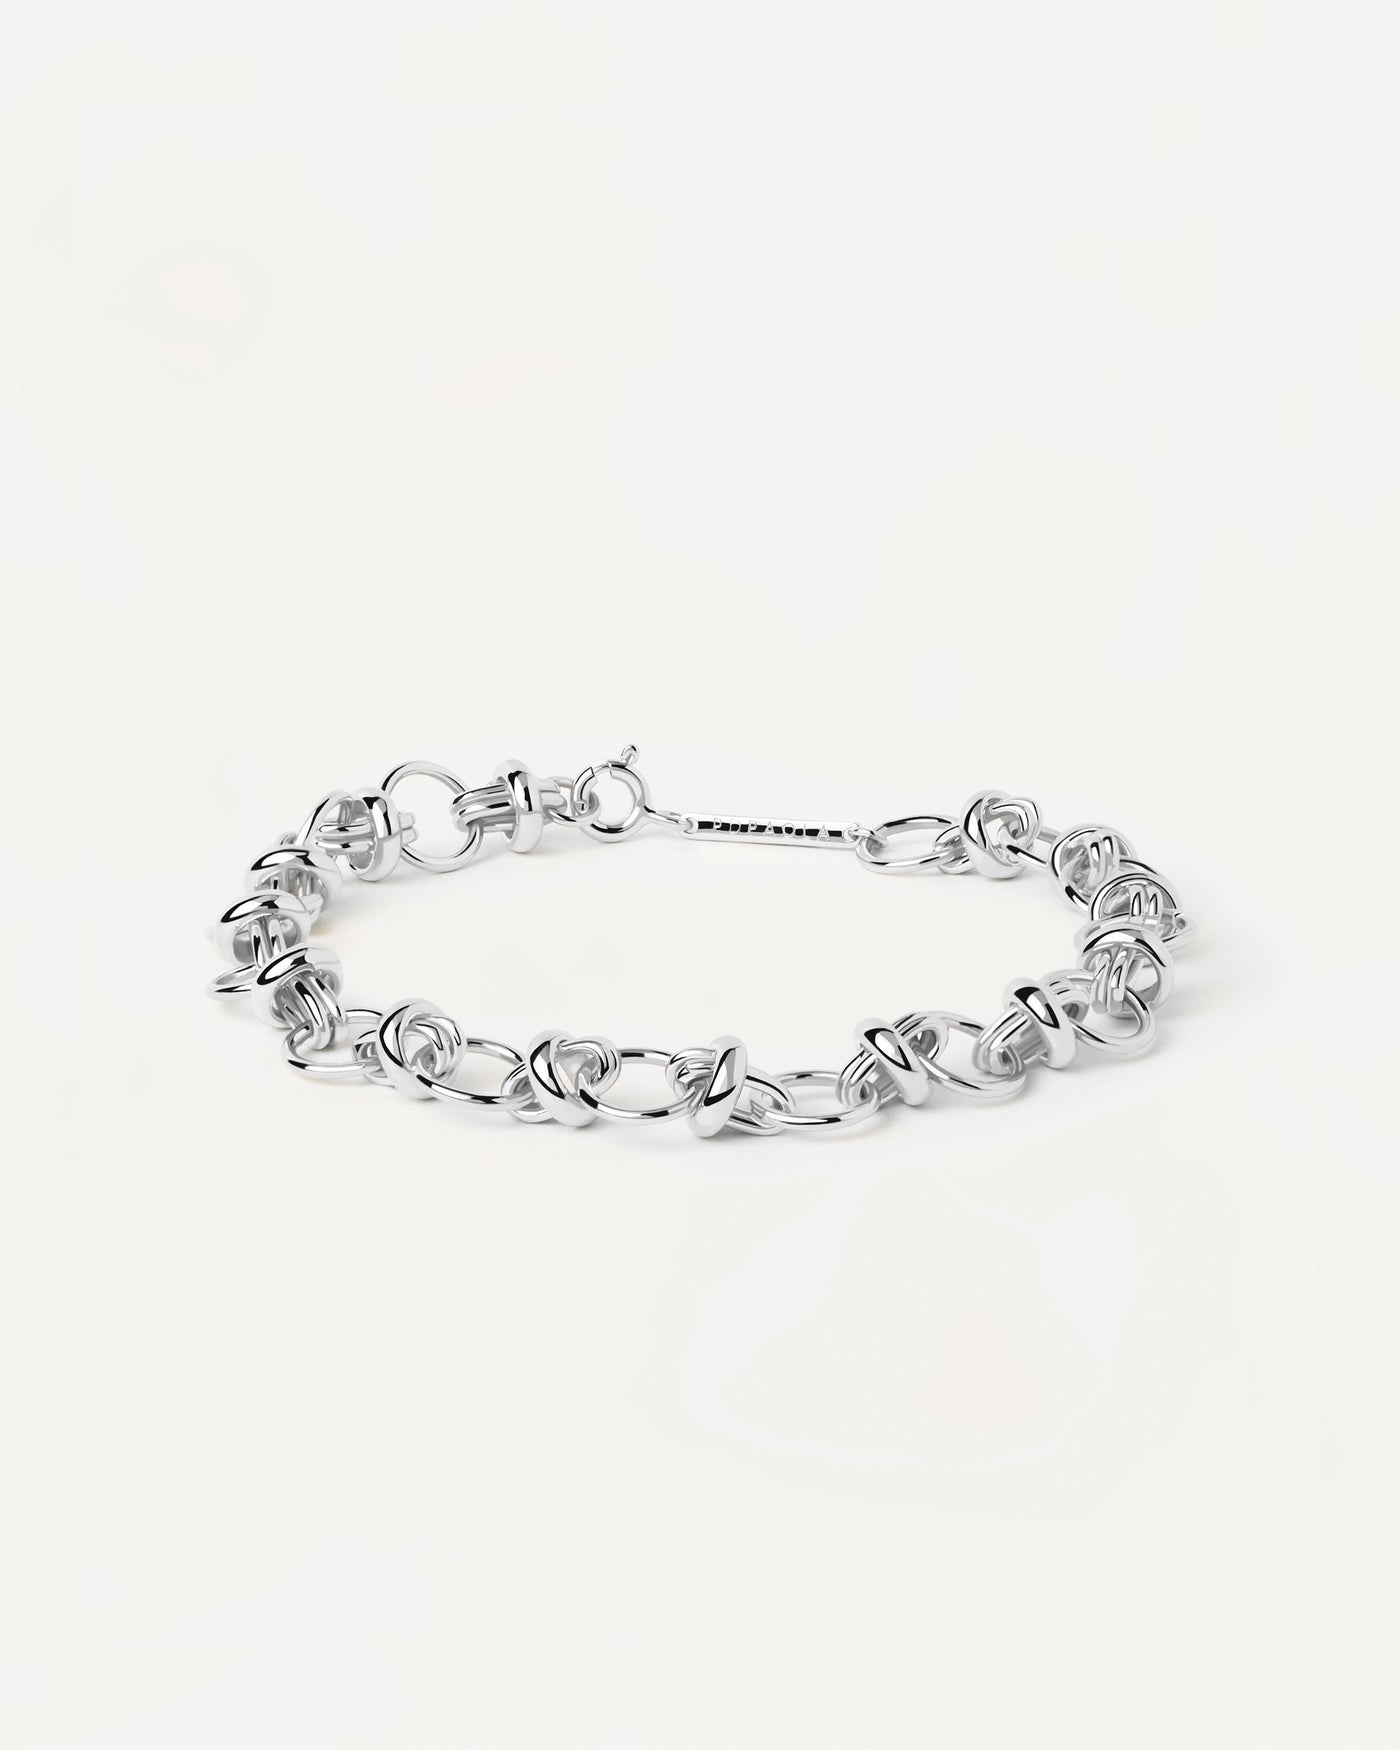 2024 Selection | Meraki Silver Chain Bracelet. Sterling silver chain bracelet with round links. Get the latest arrival from PDPAOLA. Place your order safely and get this Best Seller. Free Shipping.